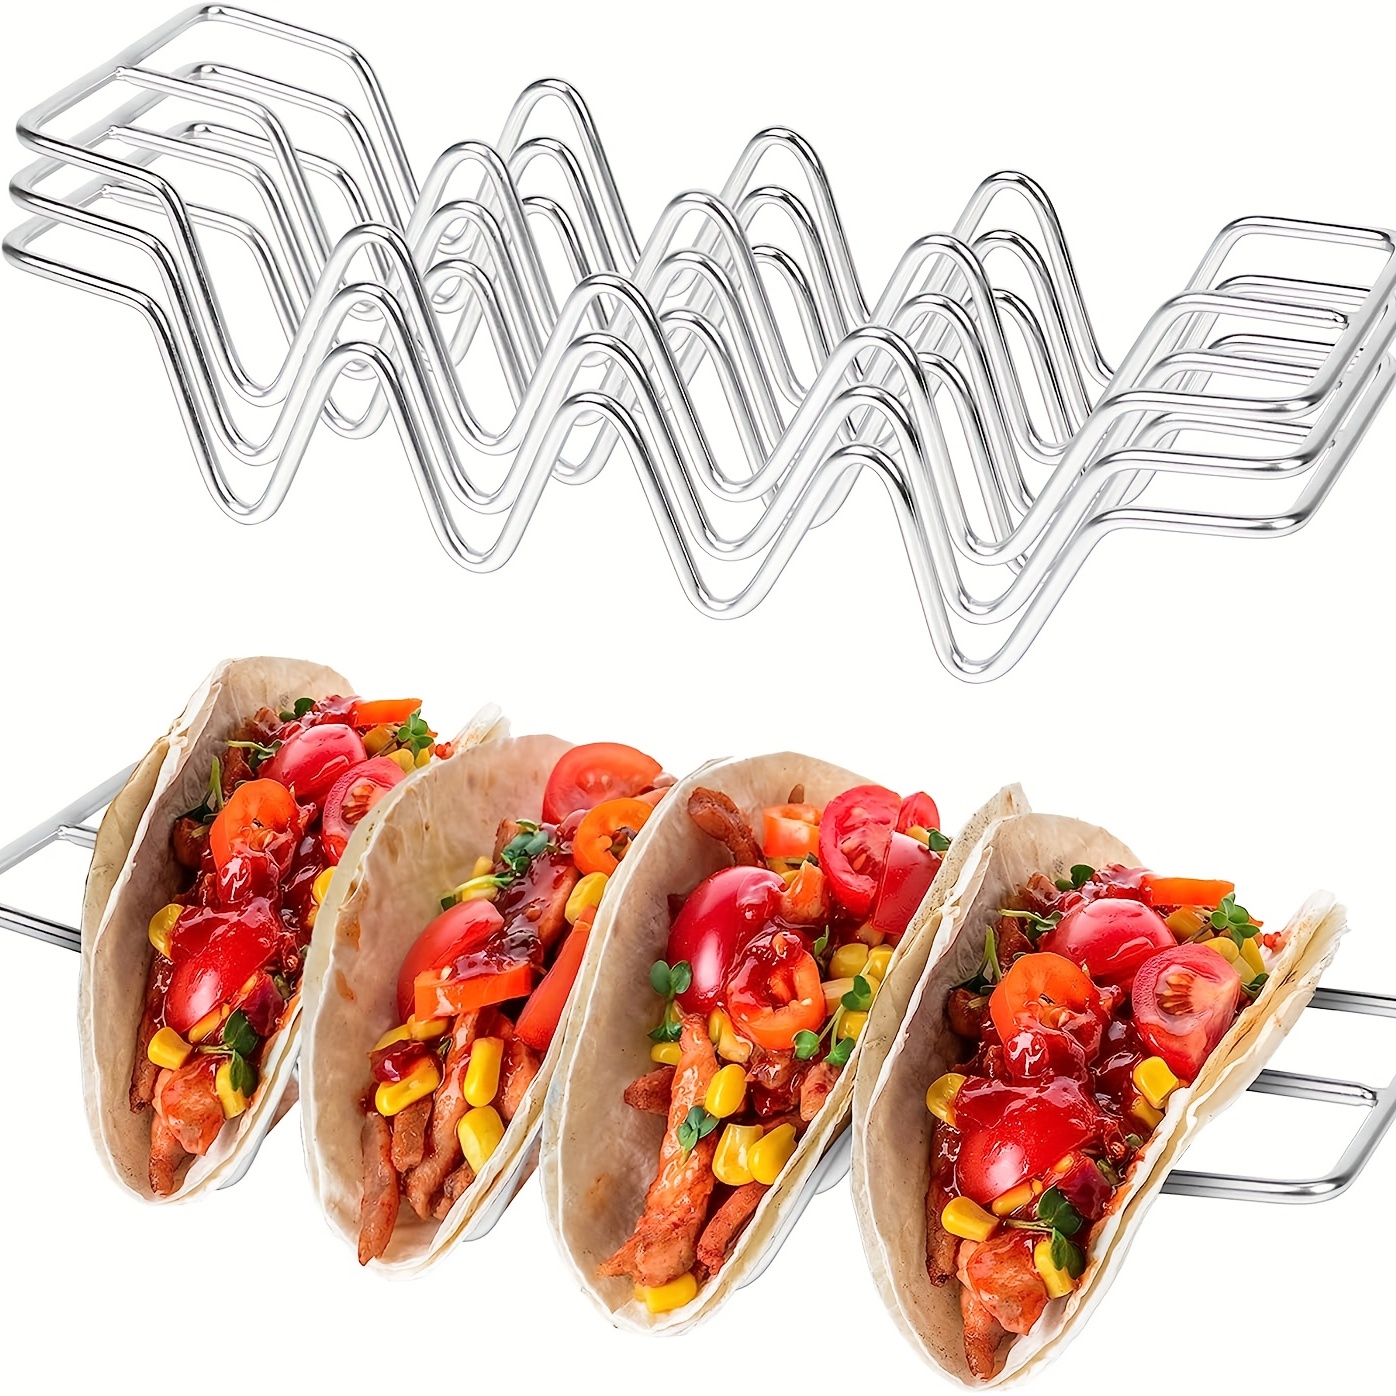 Chic Kitchen Restaurant Stainless Steel Oven Dishwasher Safe Wave Shape  Stand Tray Pizza Rack Taco Holder Kitchen Tools